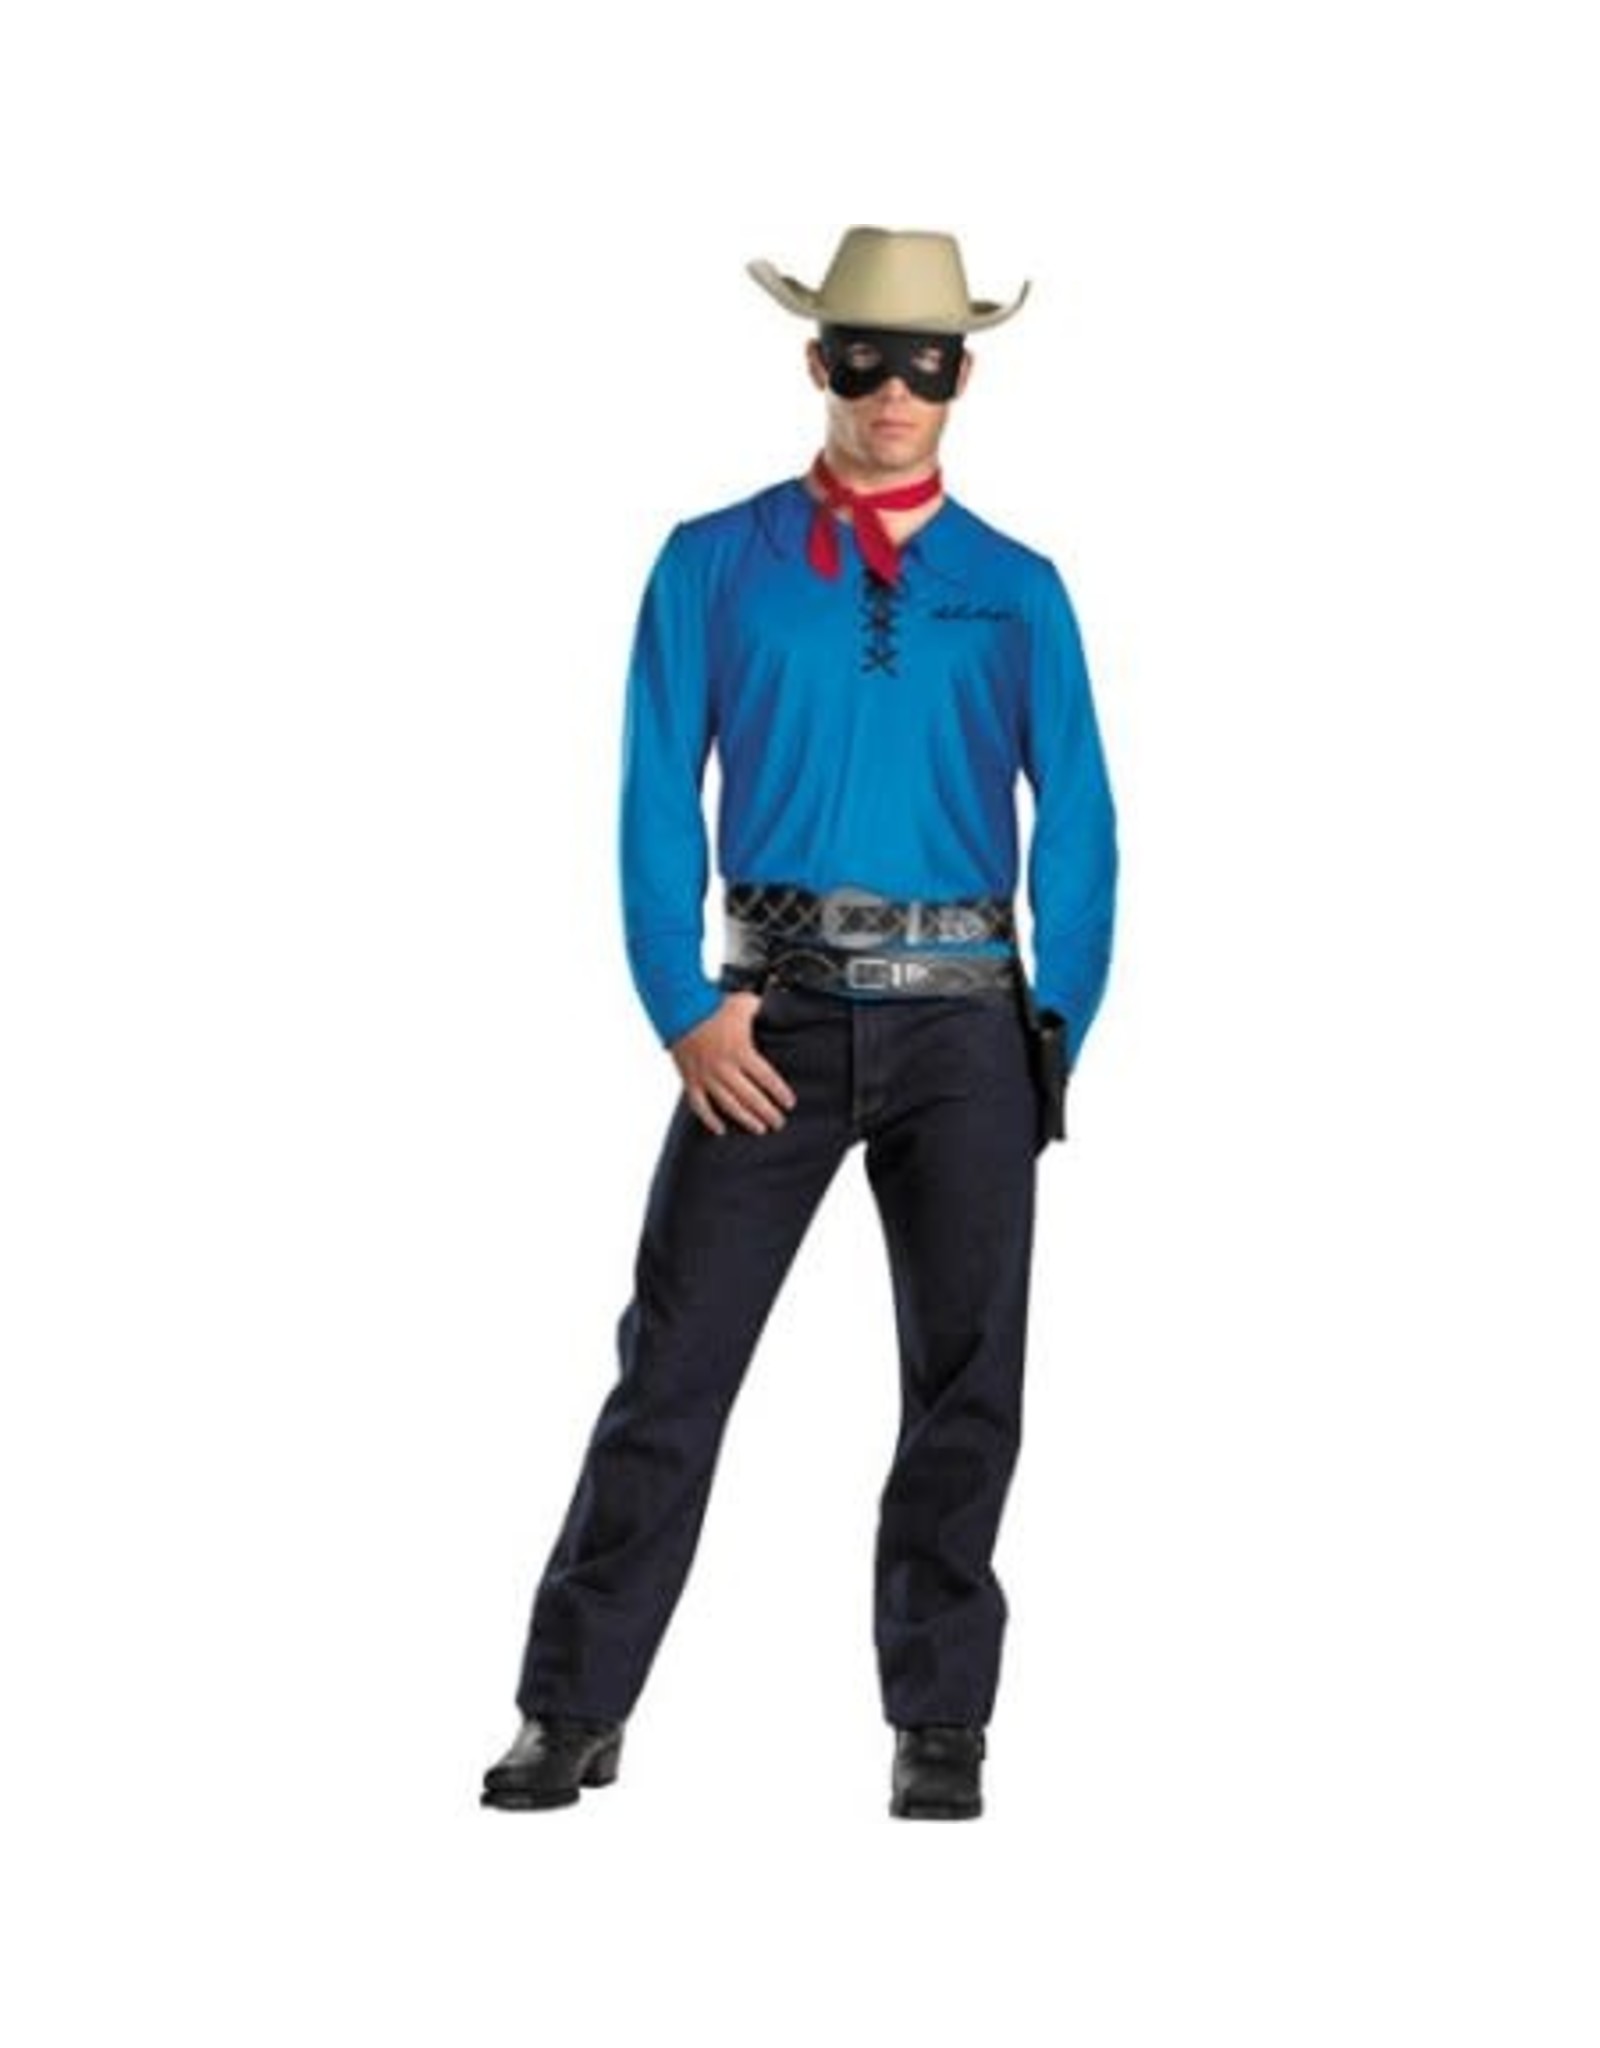 Disguise Inc The Lone Ranger, Blue, Xl - Extra Large